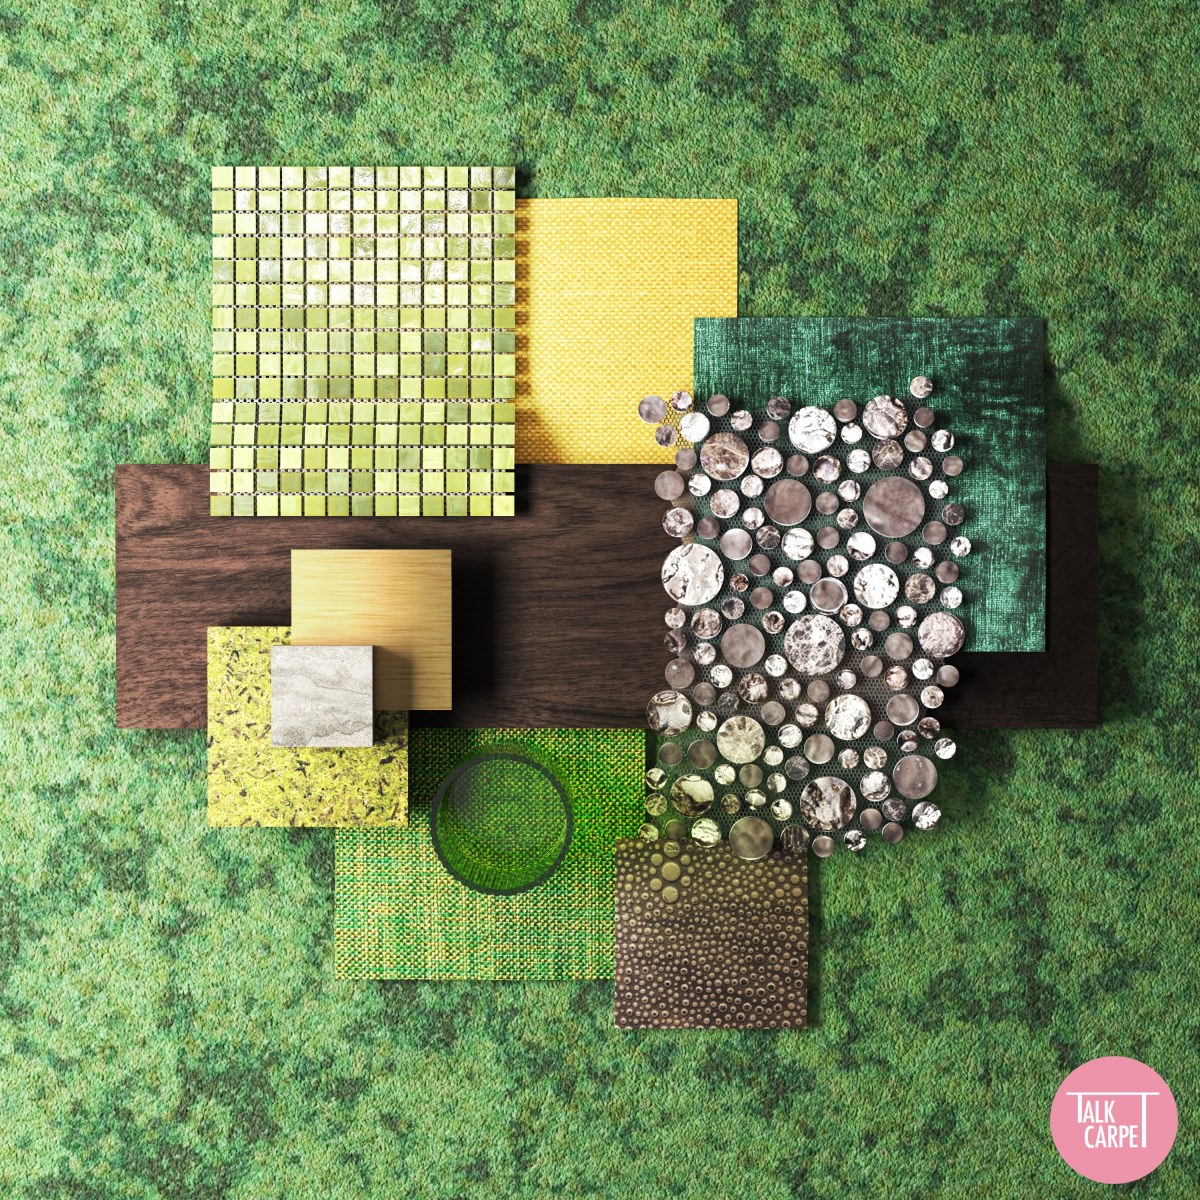 Moss carpet on a materials palette inspired by upcycled art